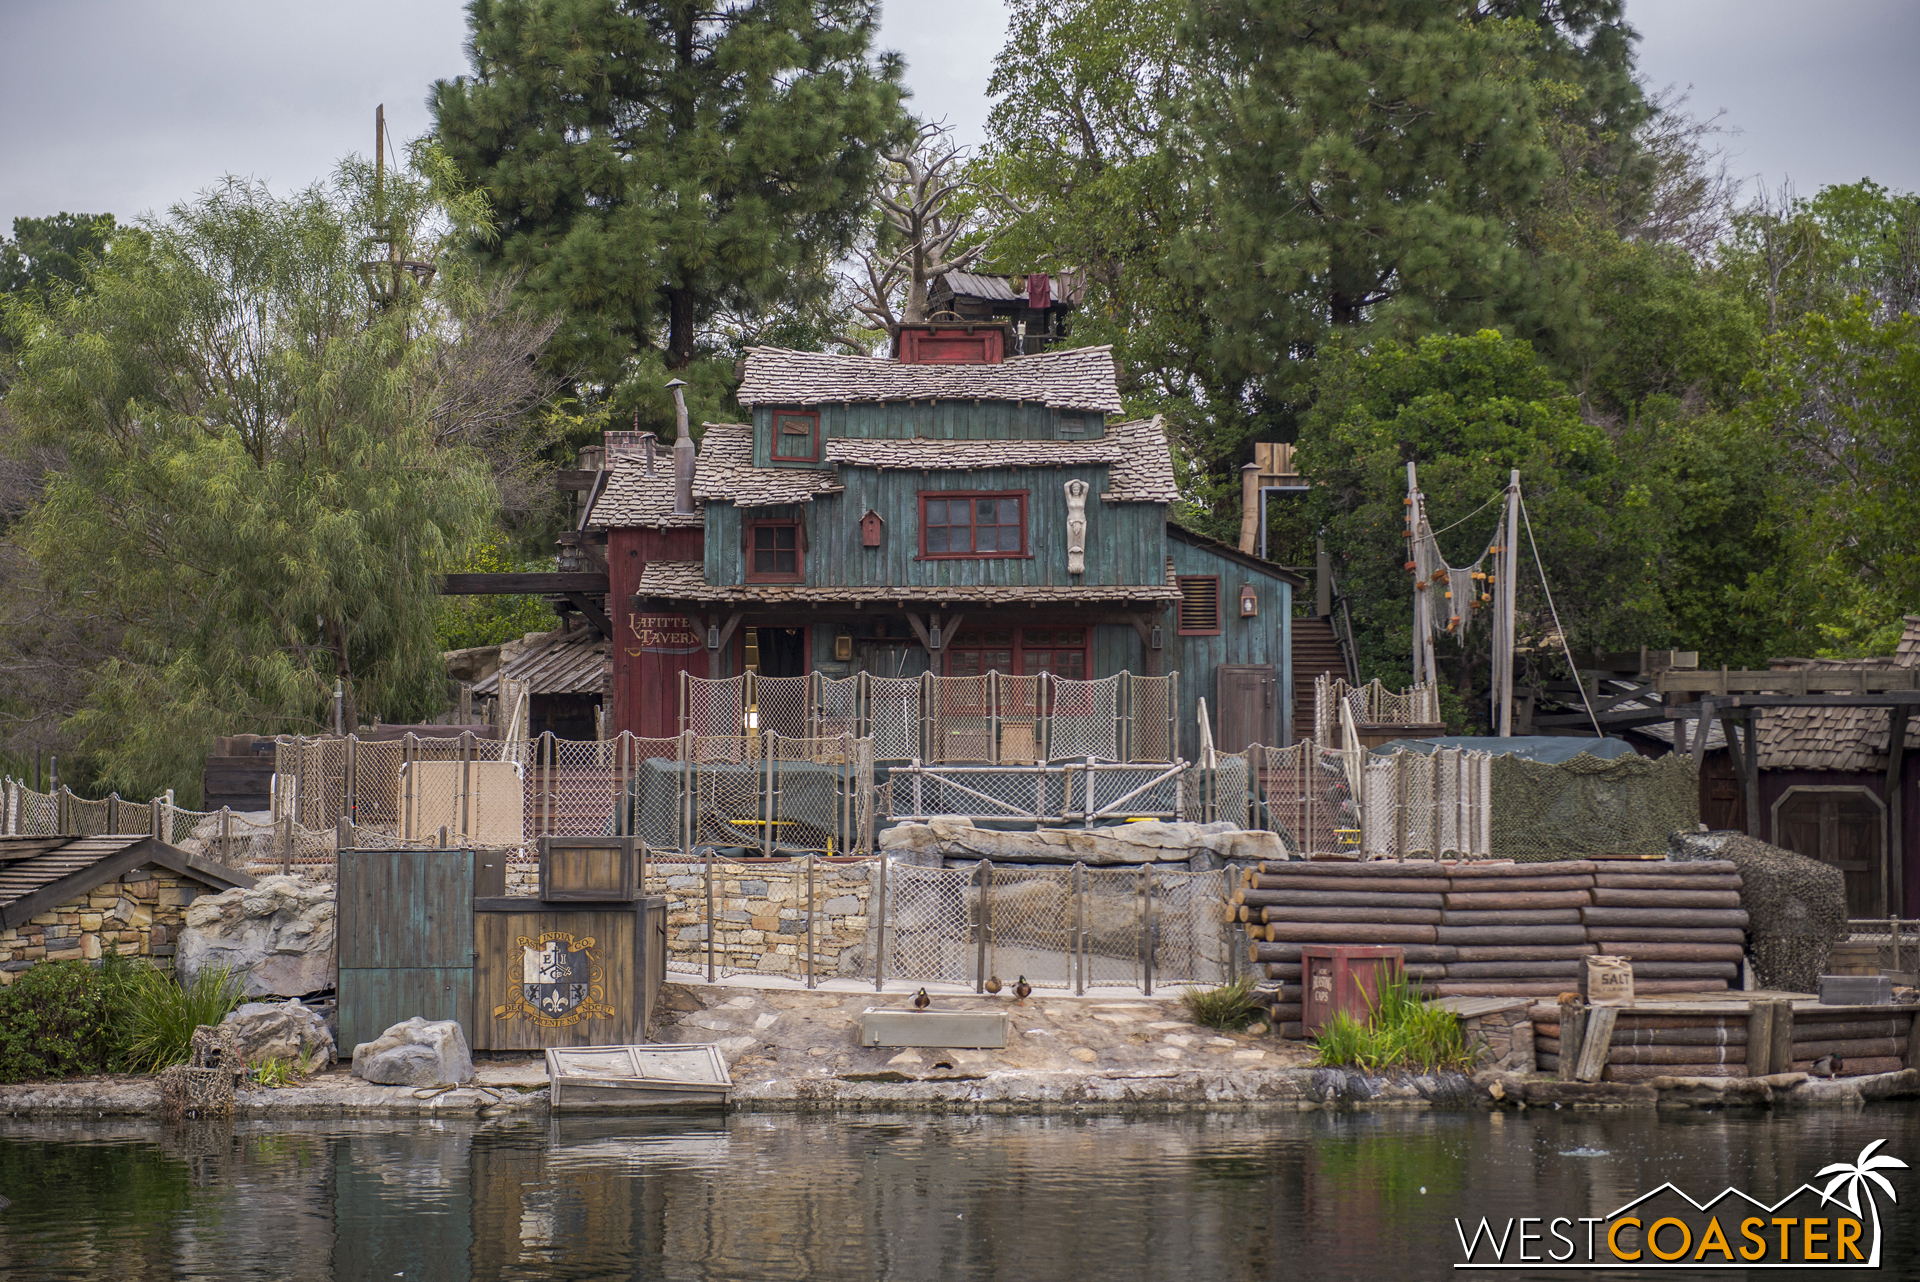  Whatever adjustments were made for the return of FANTASMIC! look well integrated. 